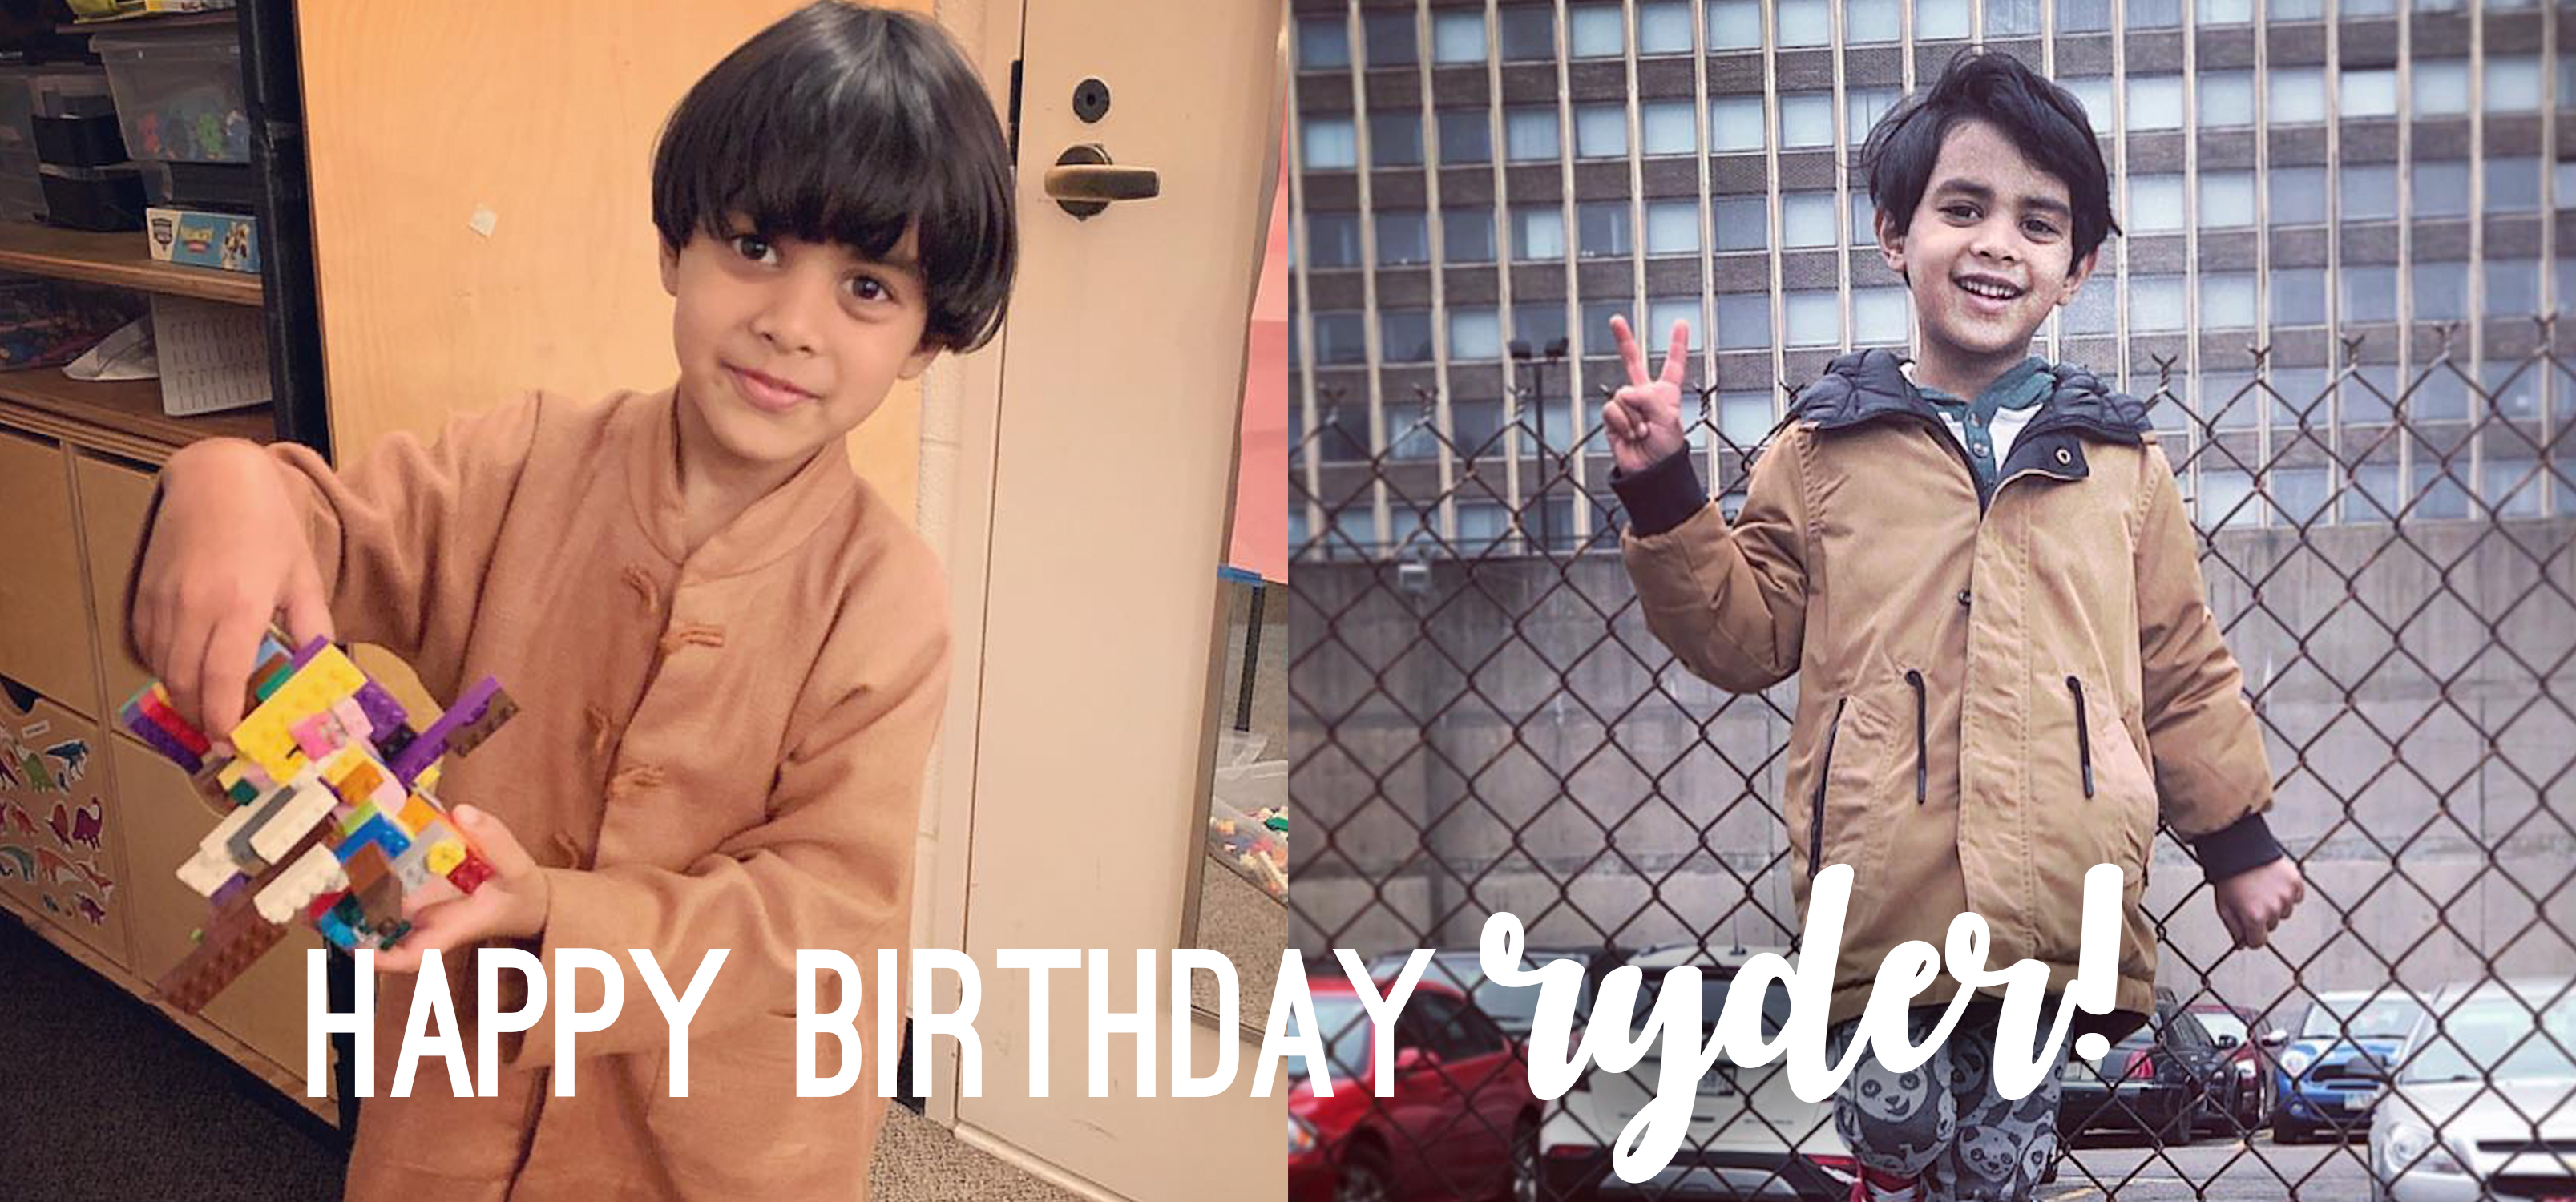 Ryder Khatiwala’s Birthday, Jeremy Lanuti Guest Stars on “Law and Order: SVU,” and more!